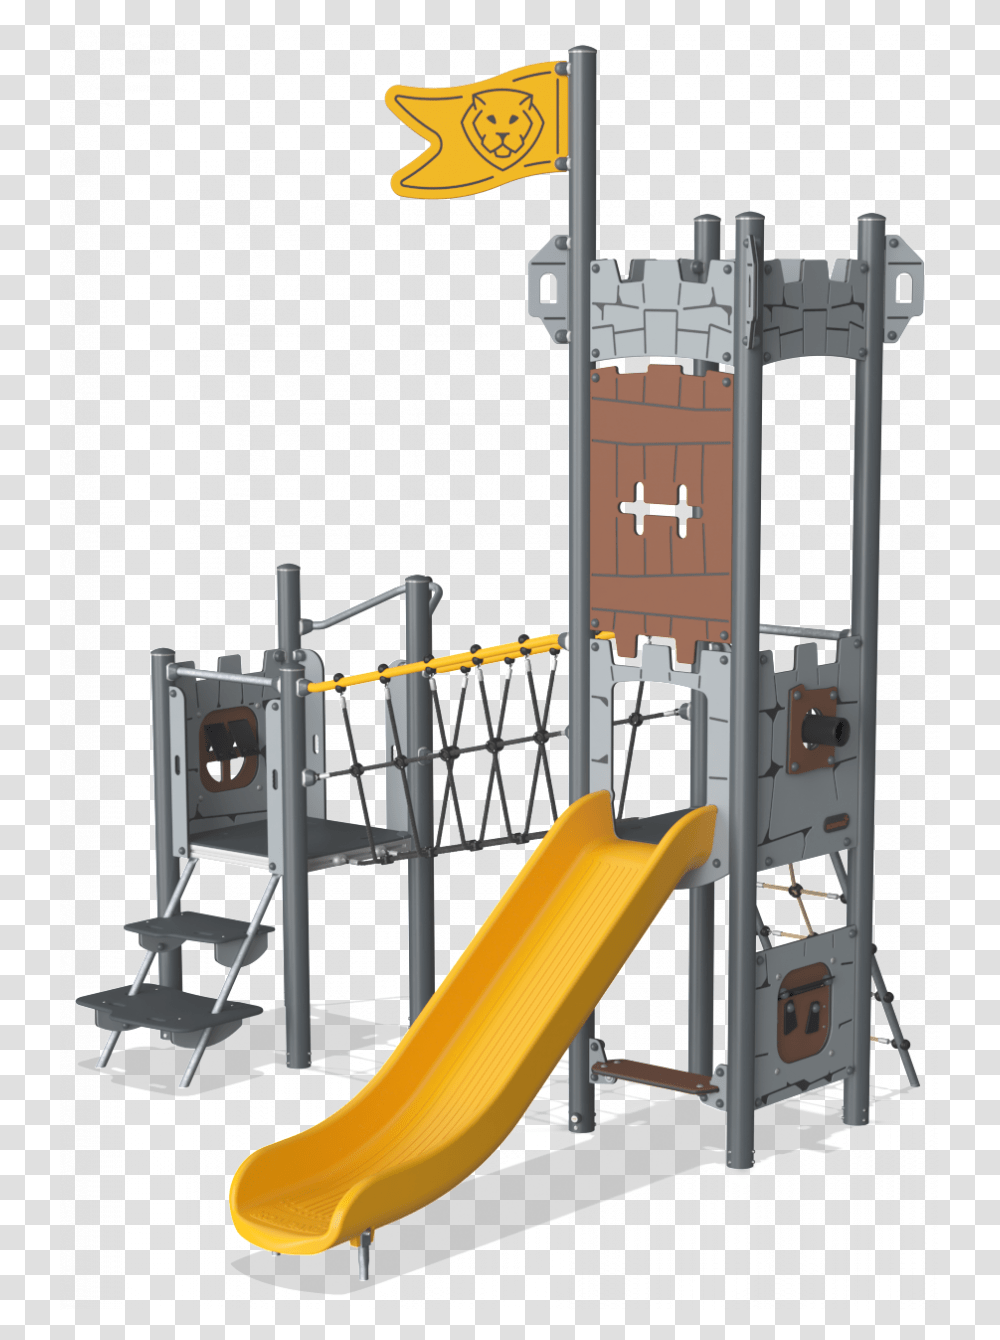 Playground Slide Kompan, Toy, Play Area, Indoor Play Area Transparent Png